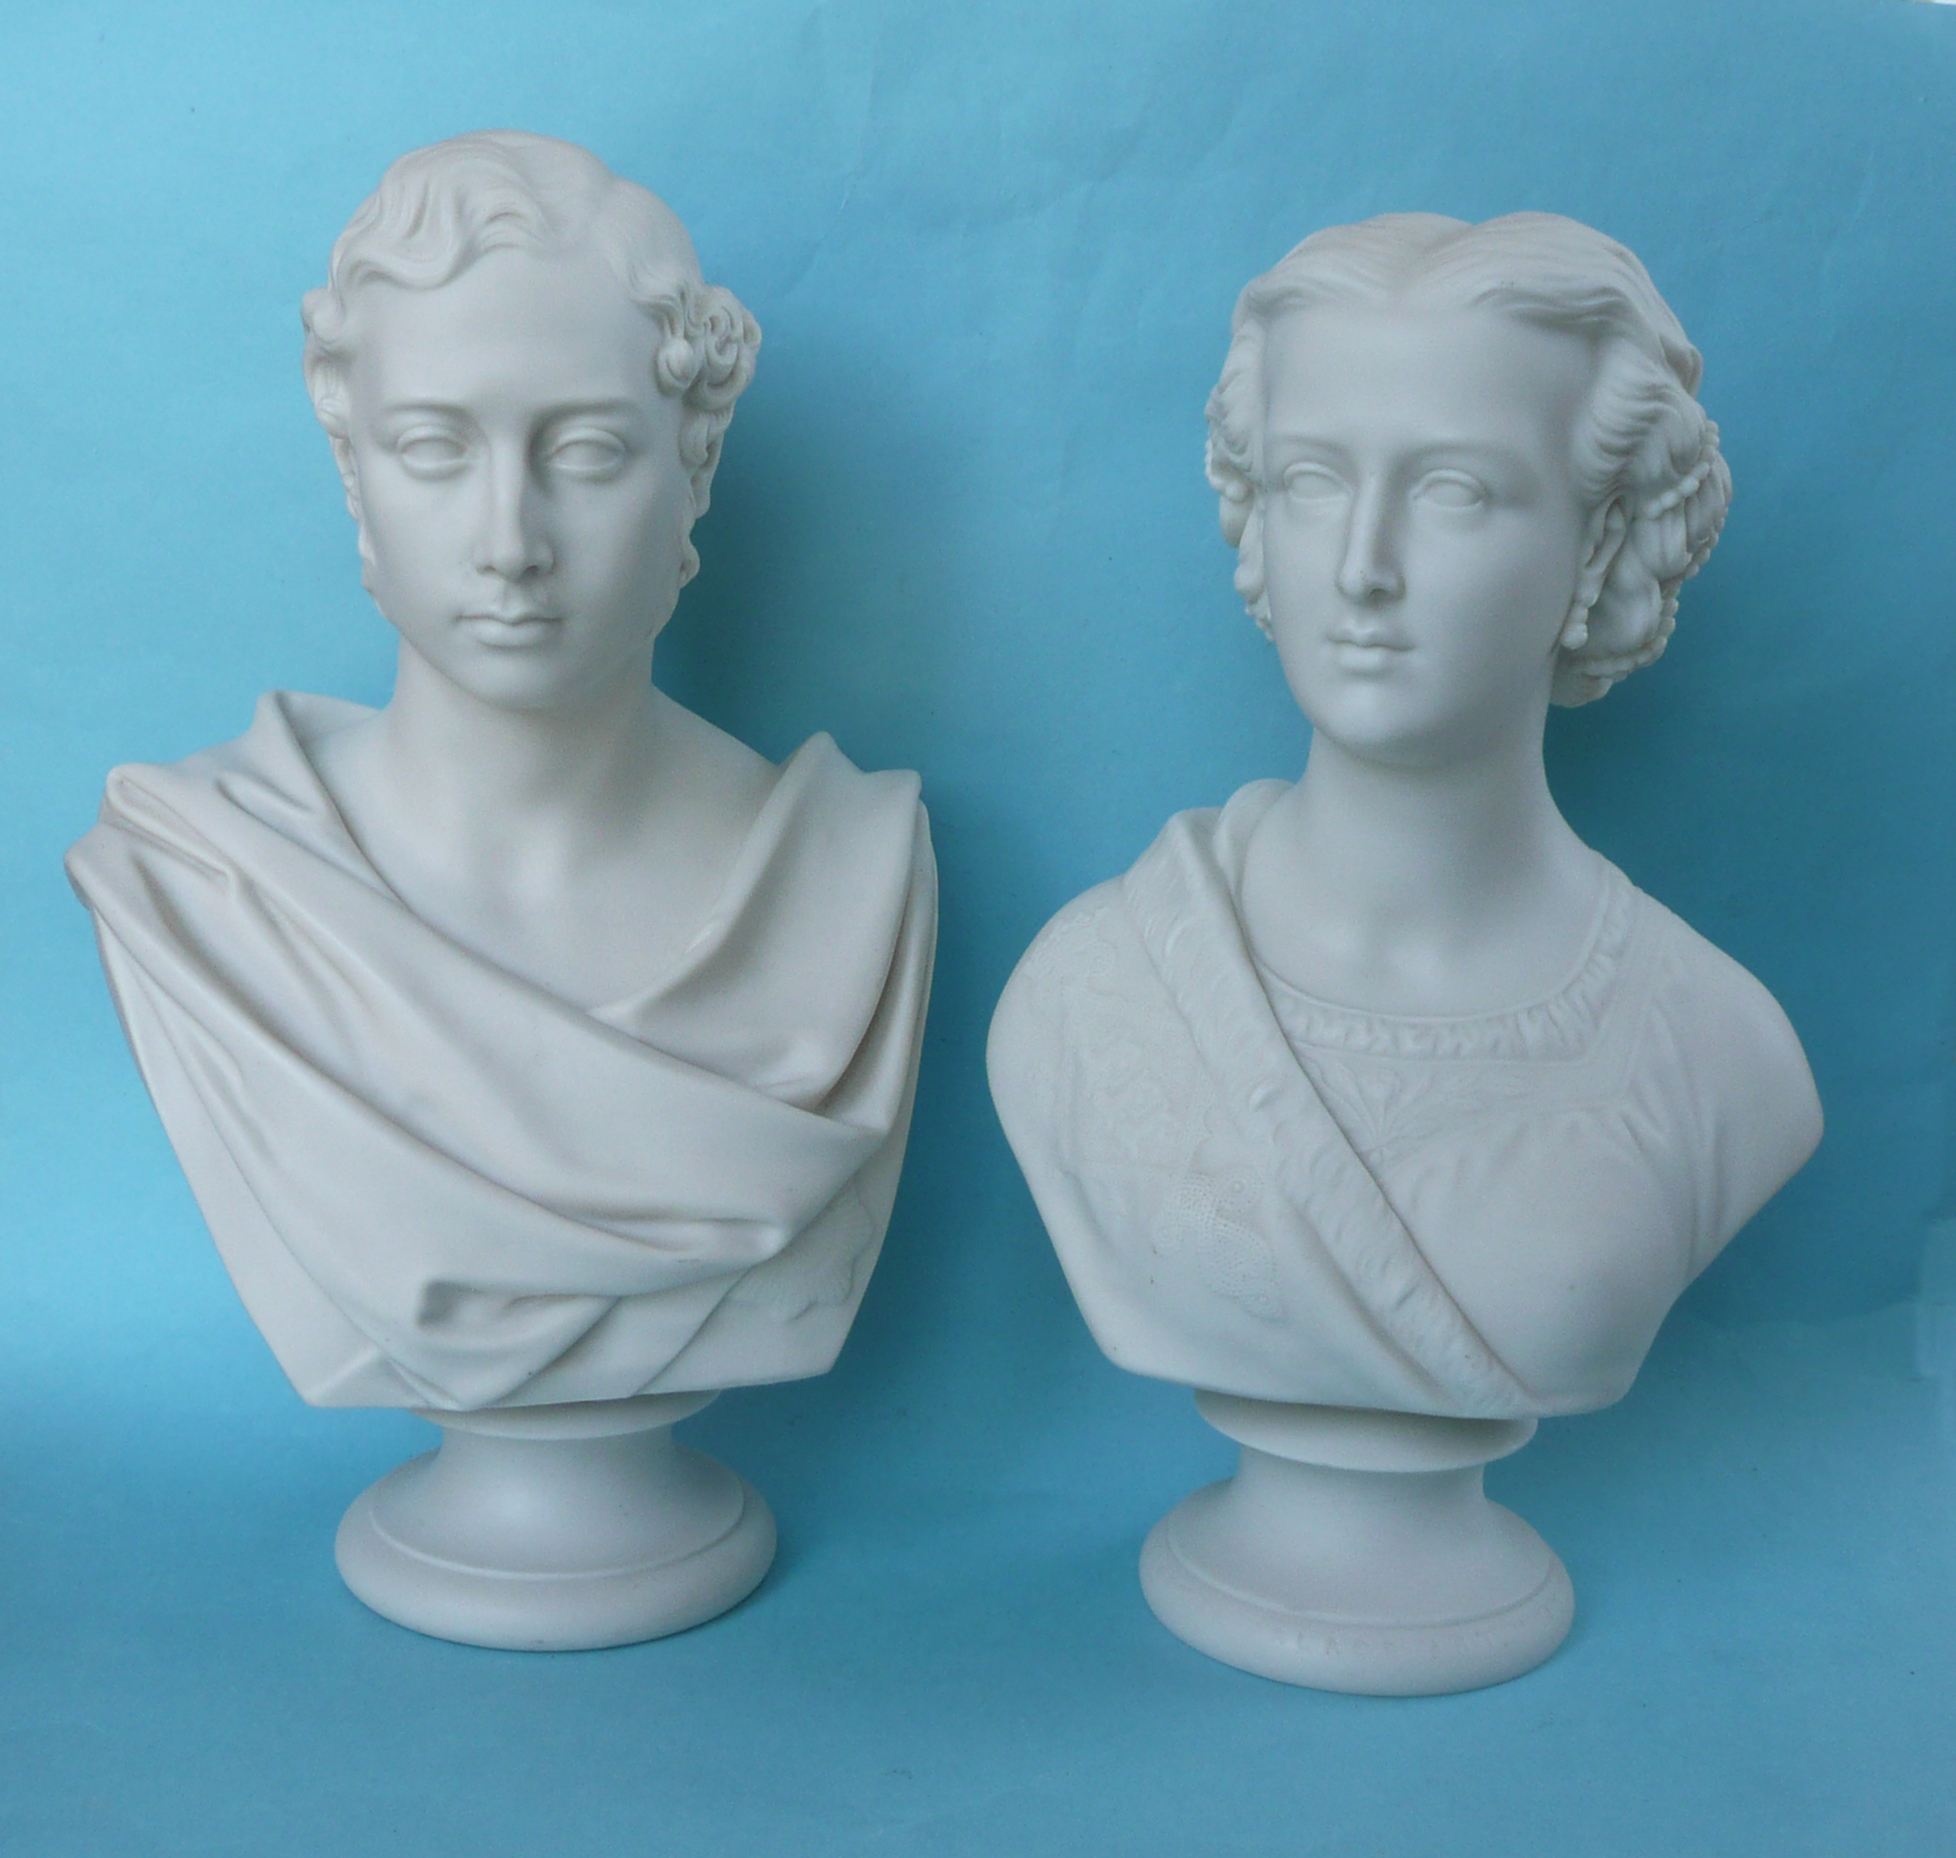 1863 Prince of Wales and Princess Alexandra: a particularly good pair of Copeland portrait busts for